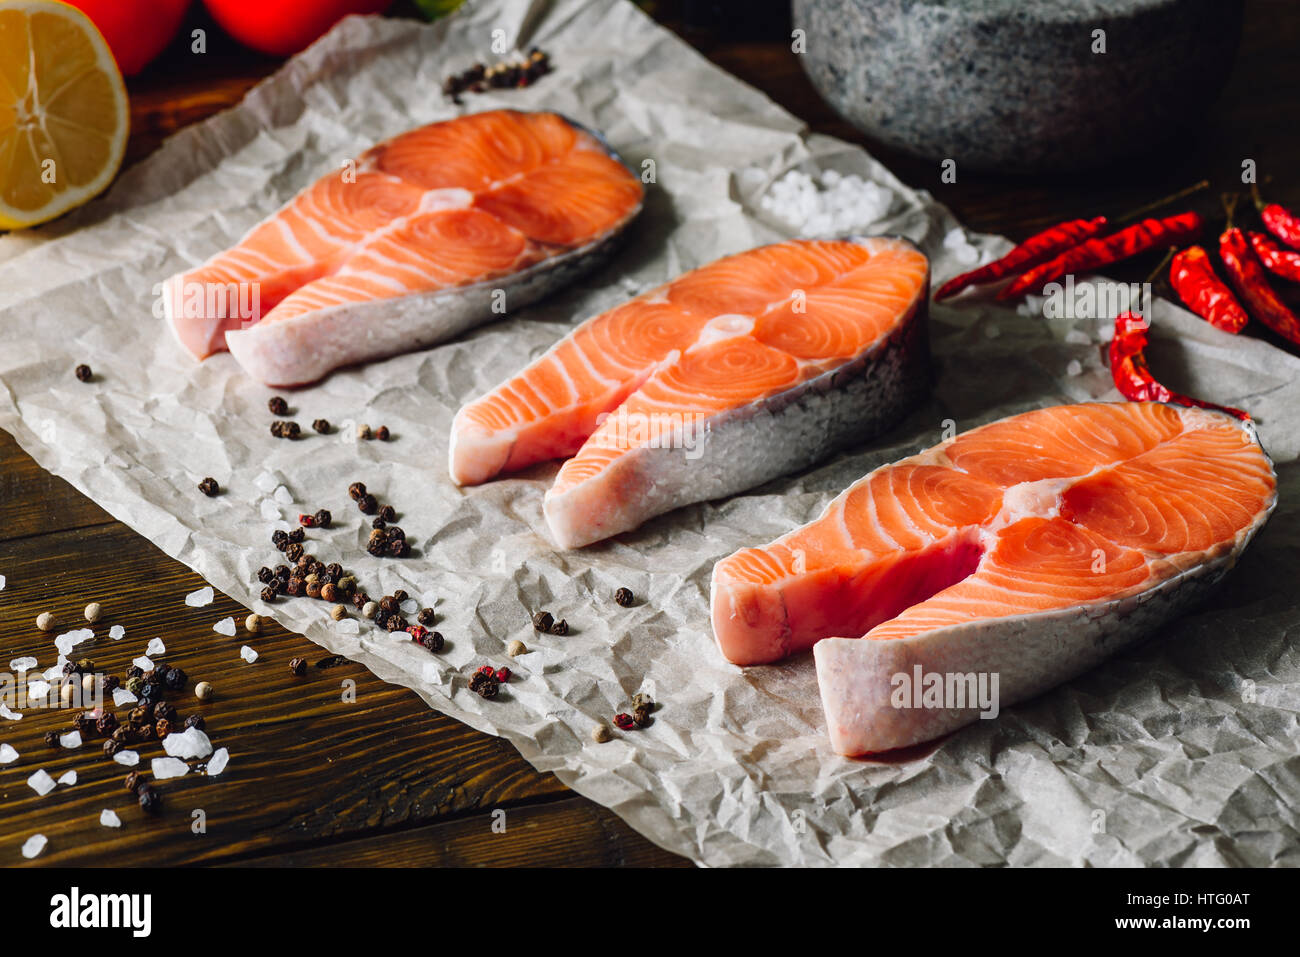 Three Raw Salmon Steaks with Some Spices Stock Photo - Alamy